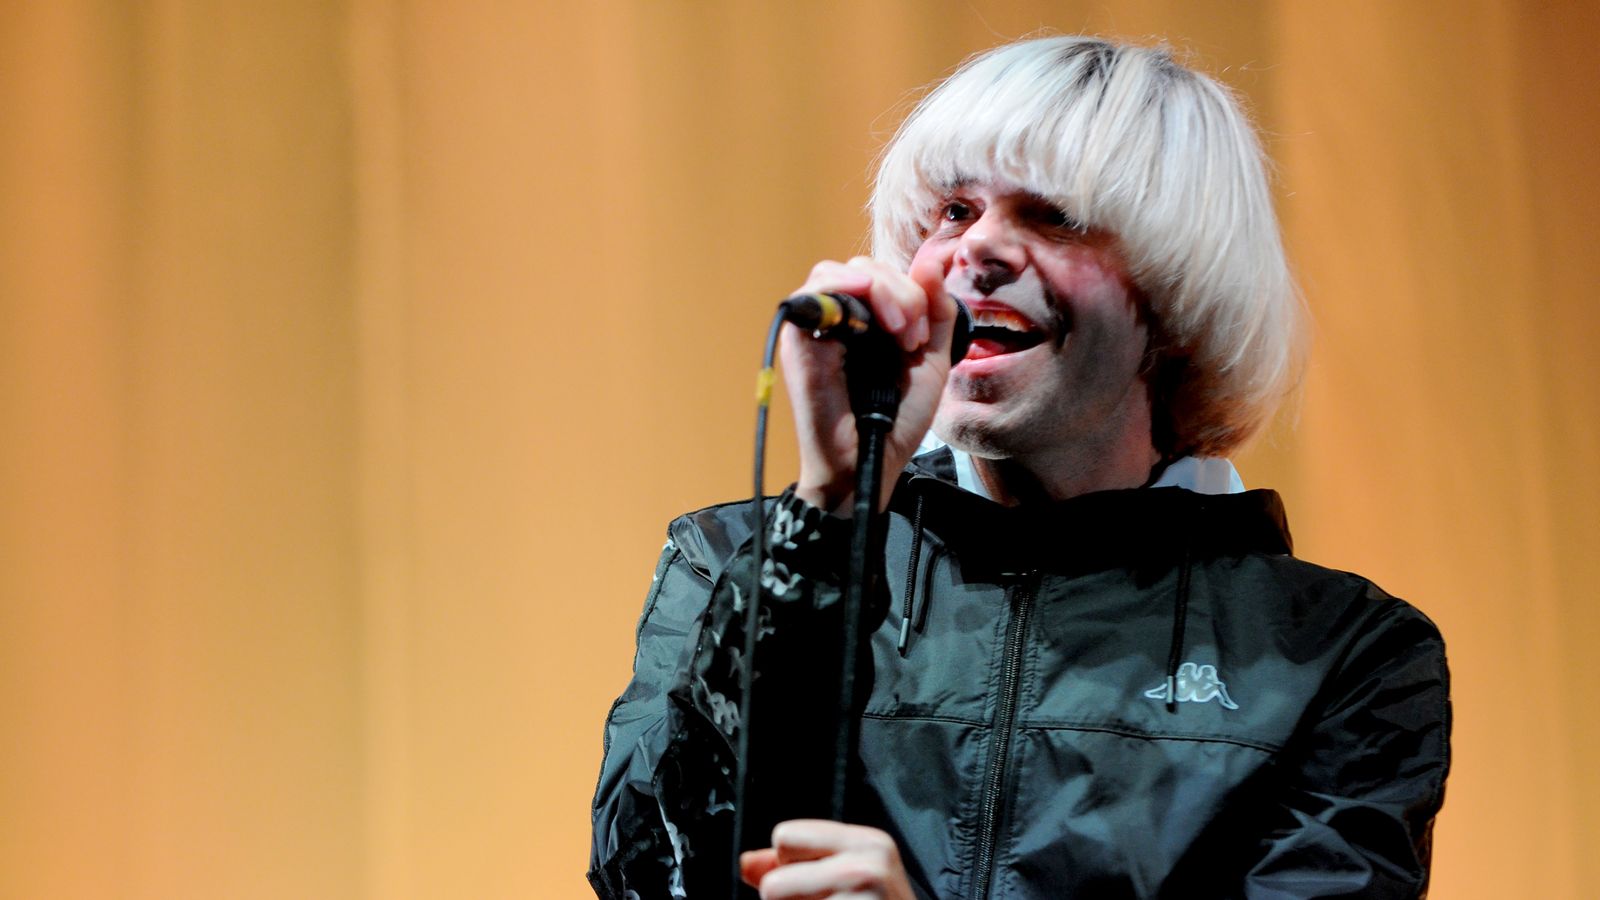 The Charlatans: albums, songs, playlists